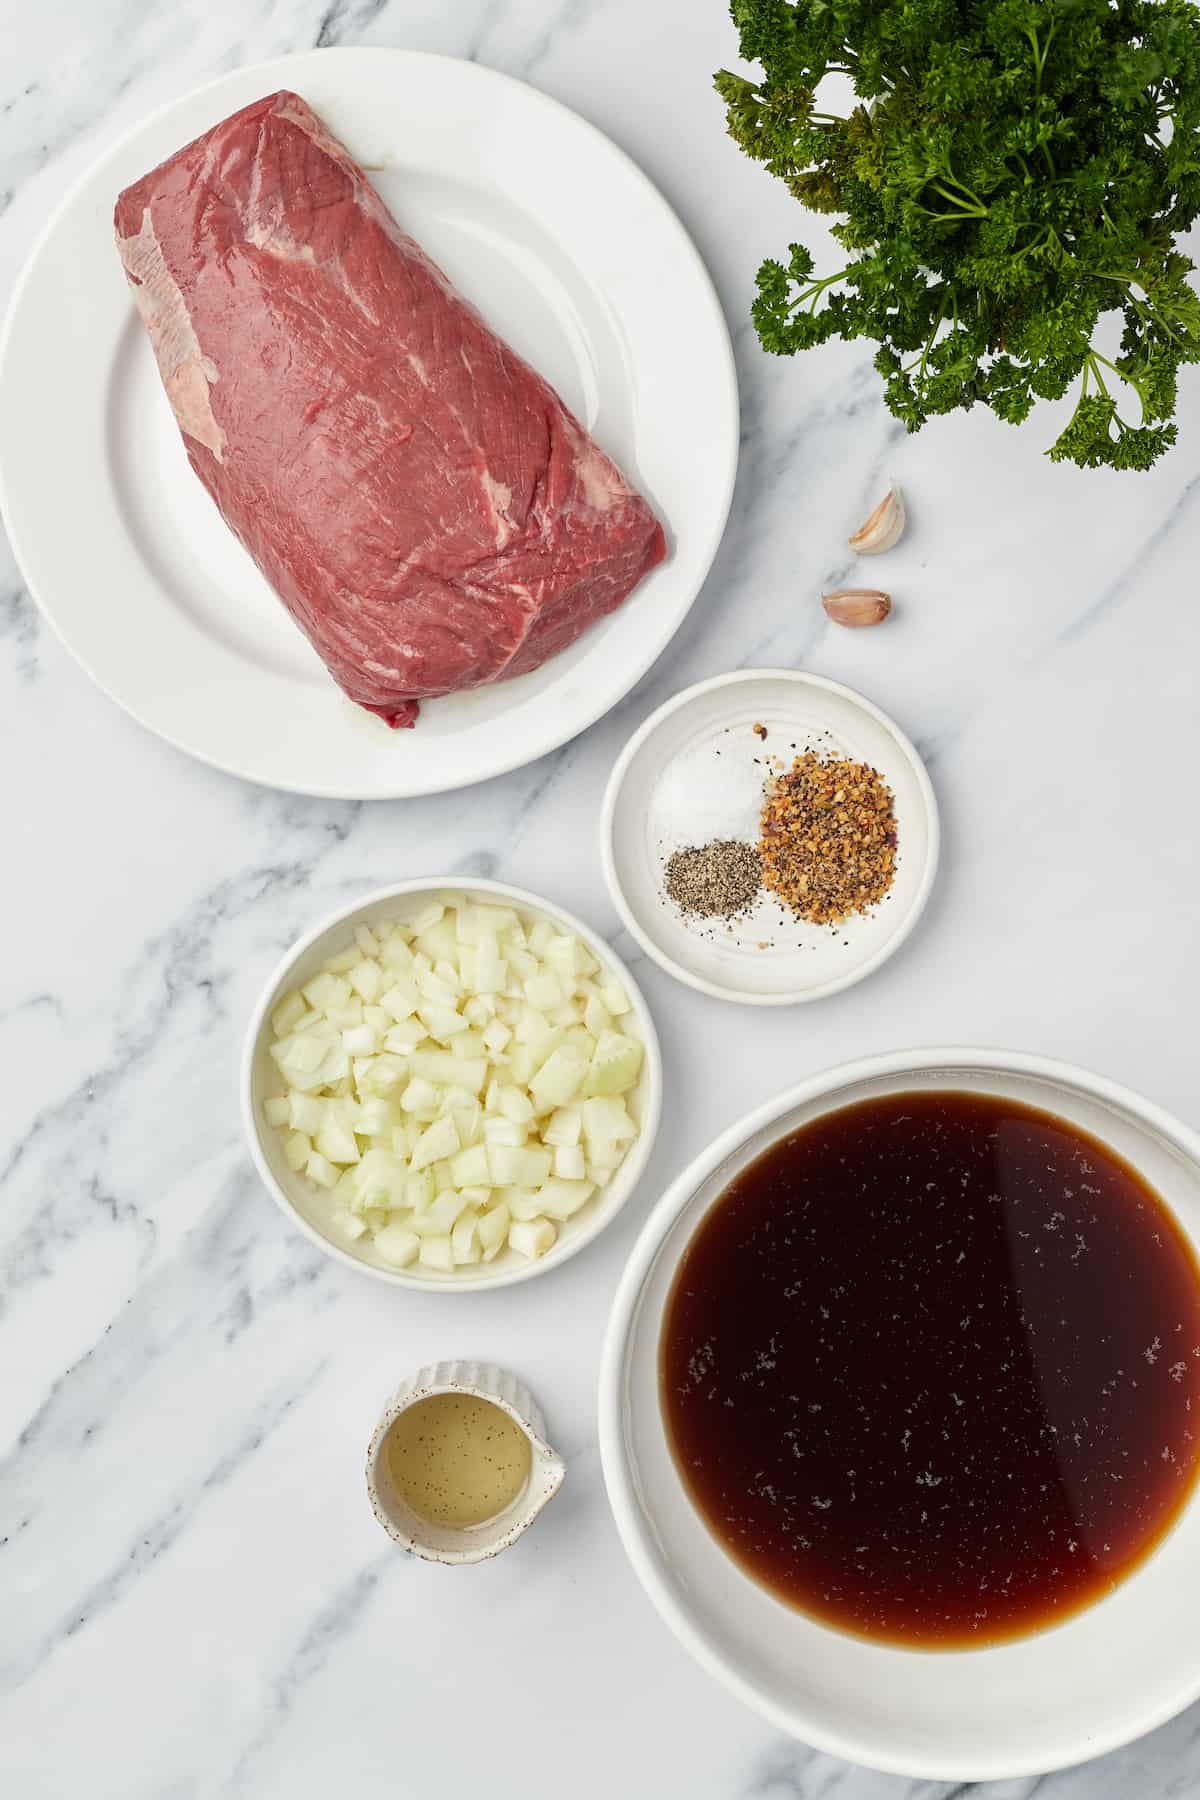 A raw chuck roast, steak seasoning, garlic cloves and the rest of the beef ingredients on a marble countertop